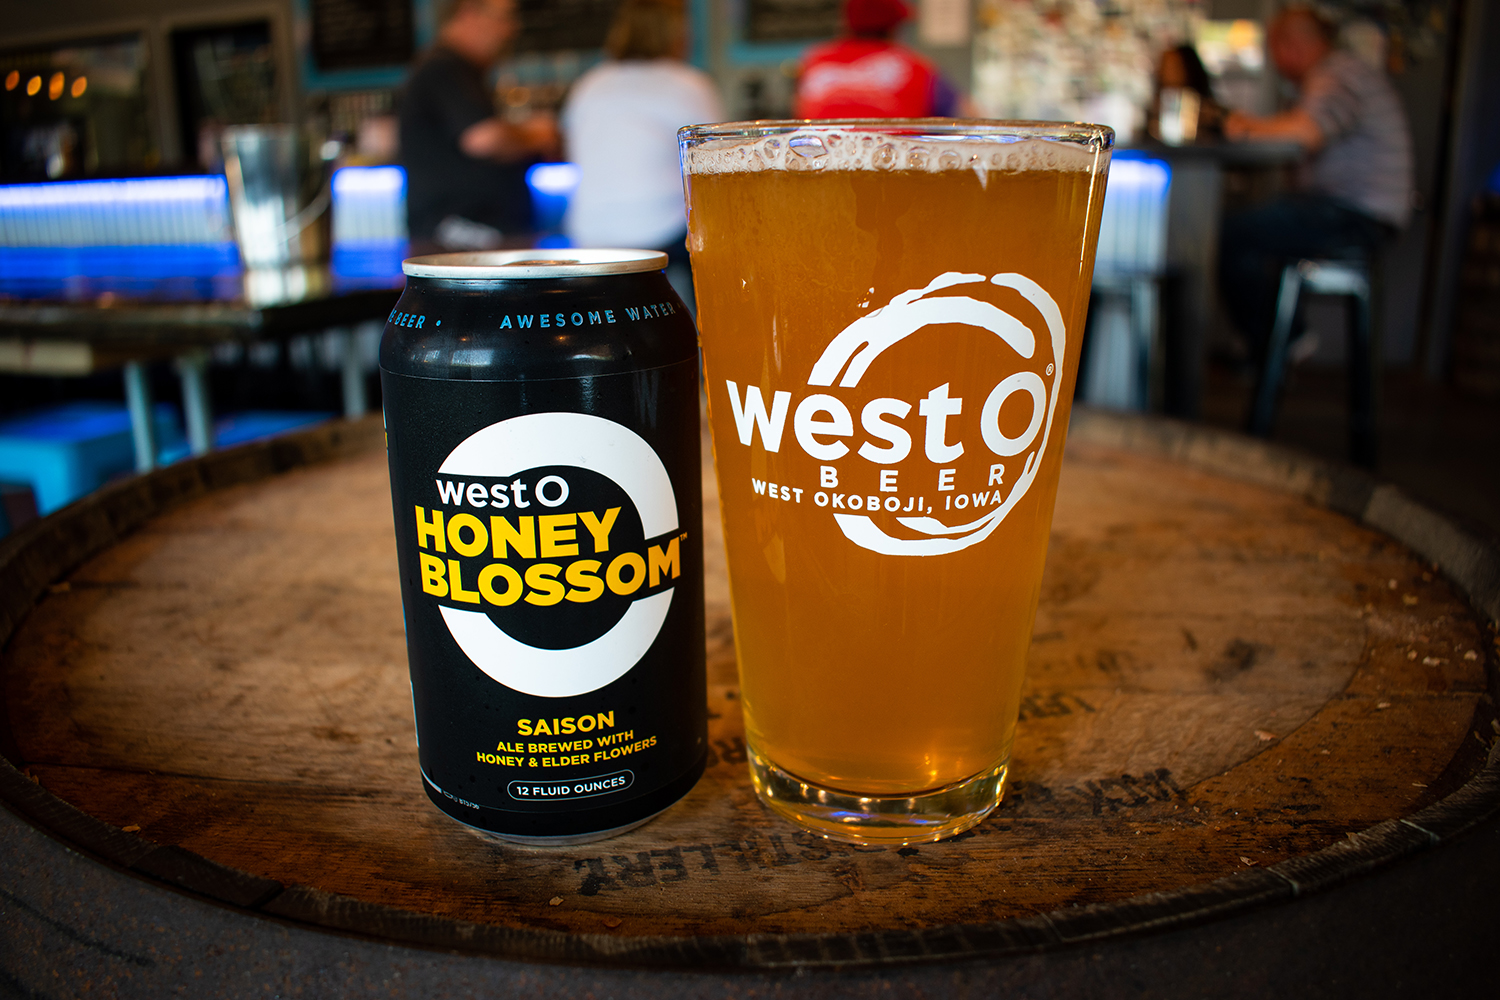 West O Beer proudly presents Honey Blososom-- a Saison Ale brewed with Honey & Elder Flowers